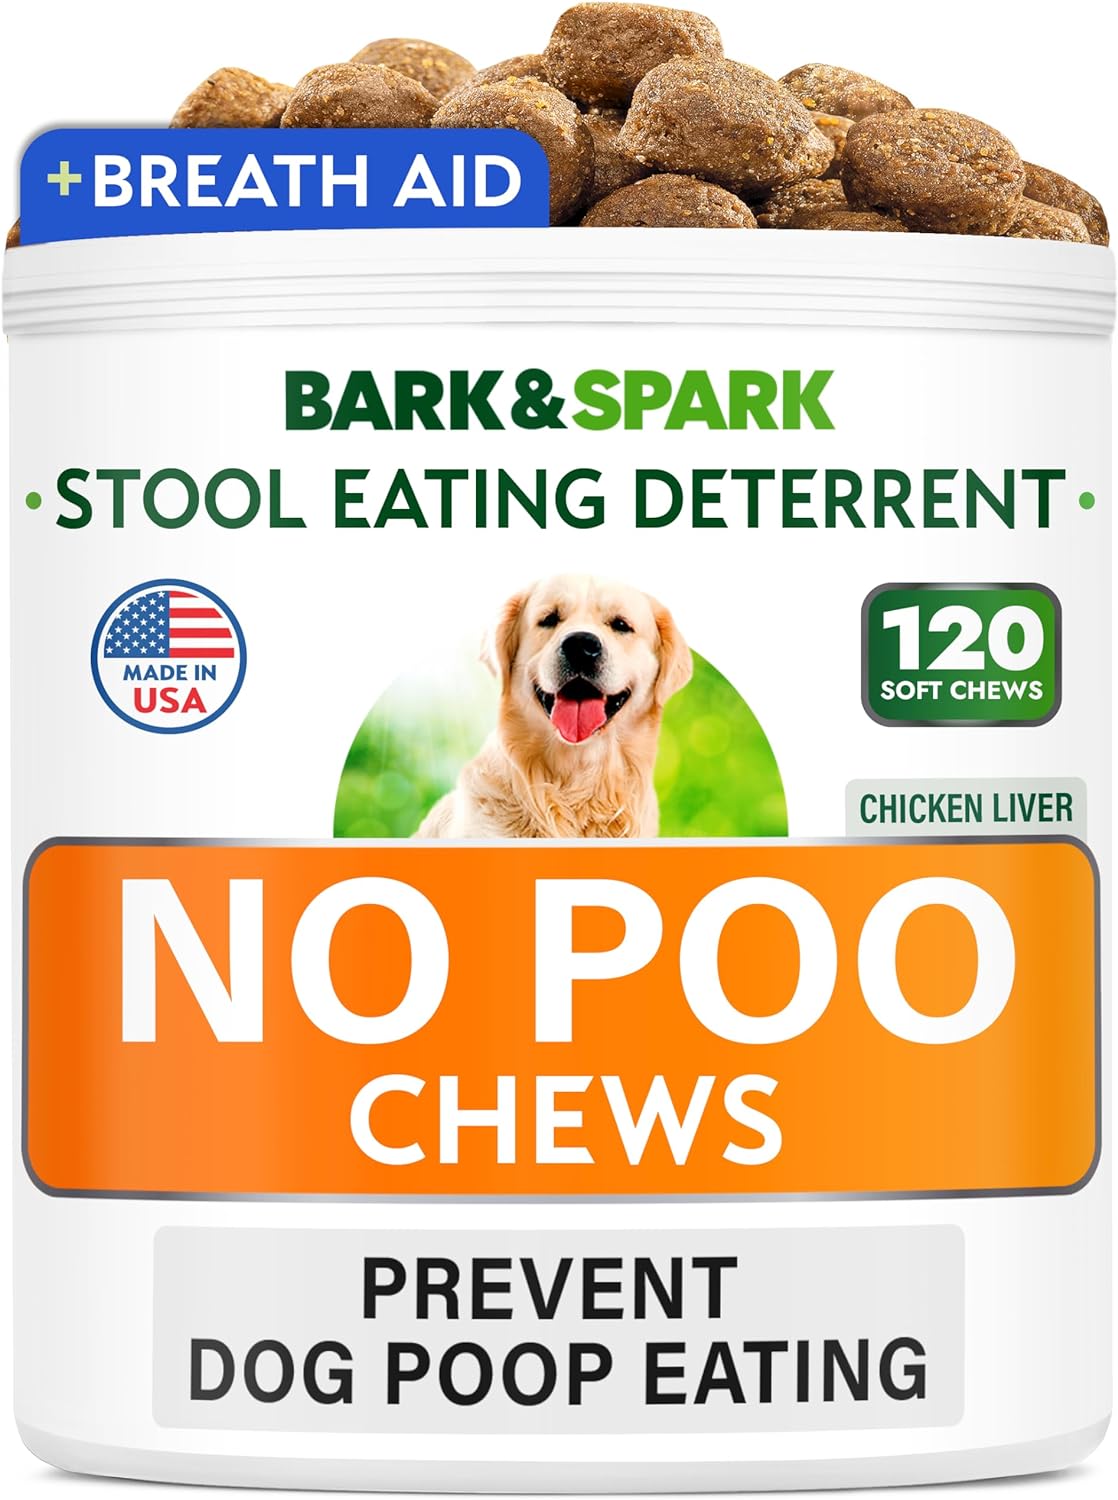 Bark&Spark NO Poo Treats - Prevent Dog Poop Eating - Coprophagia Treatment - Stool Eating Deterrent - Probiotics & Enzymes - Digestive Health + Breath Aid - 120 Soft Chews - USA Made - Chicken Liver